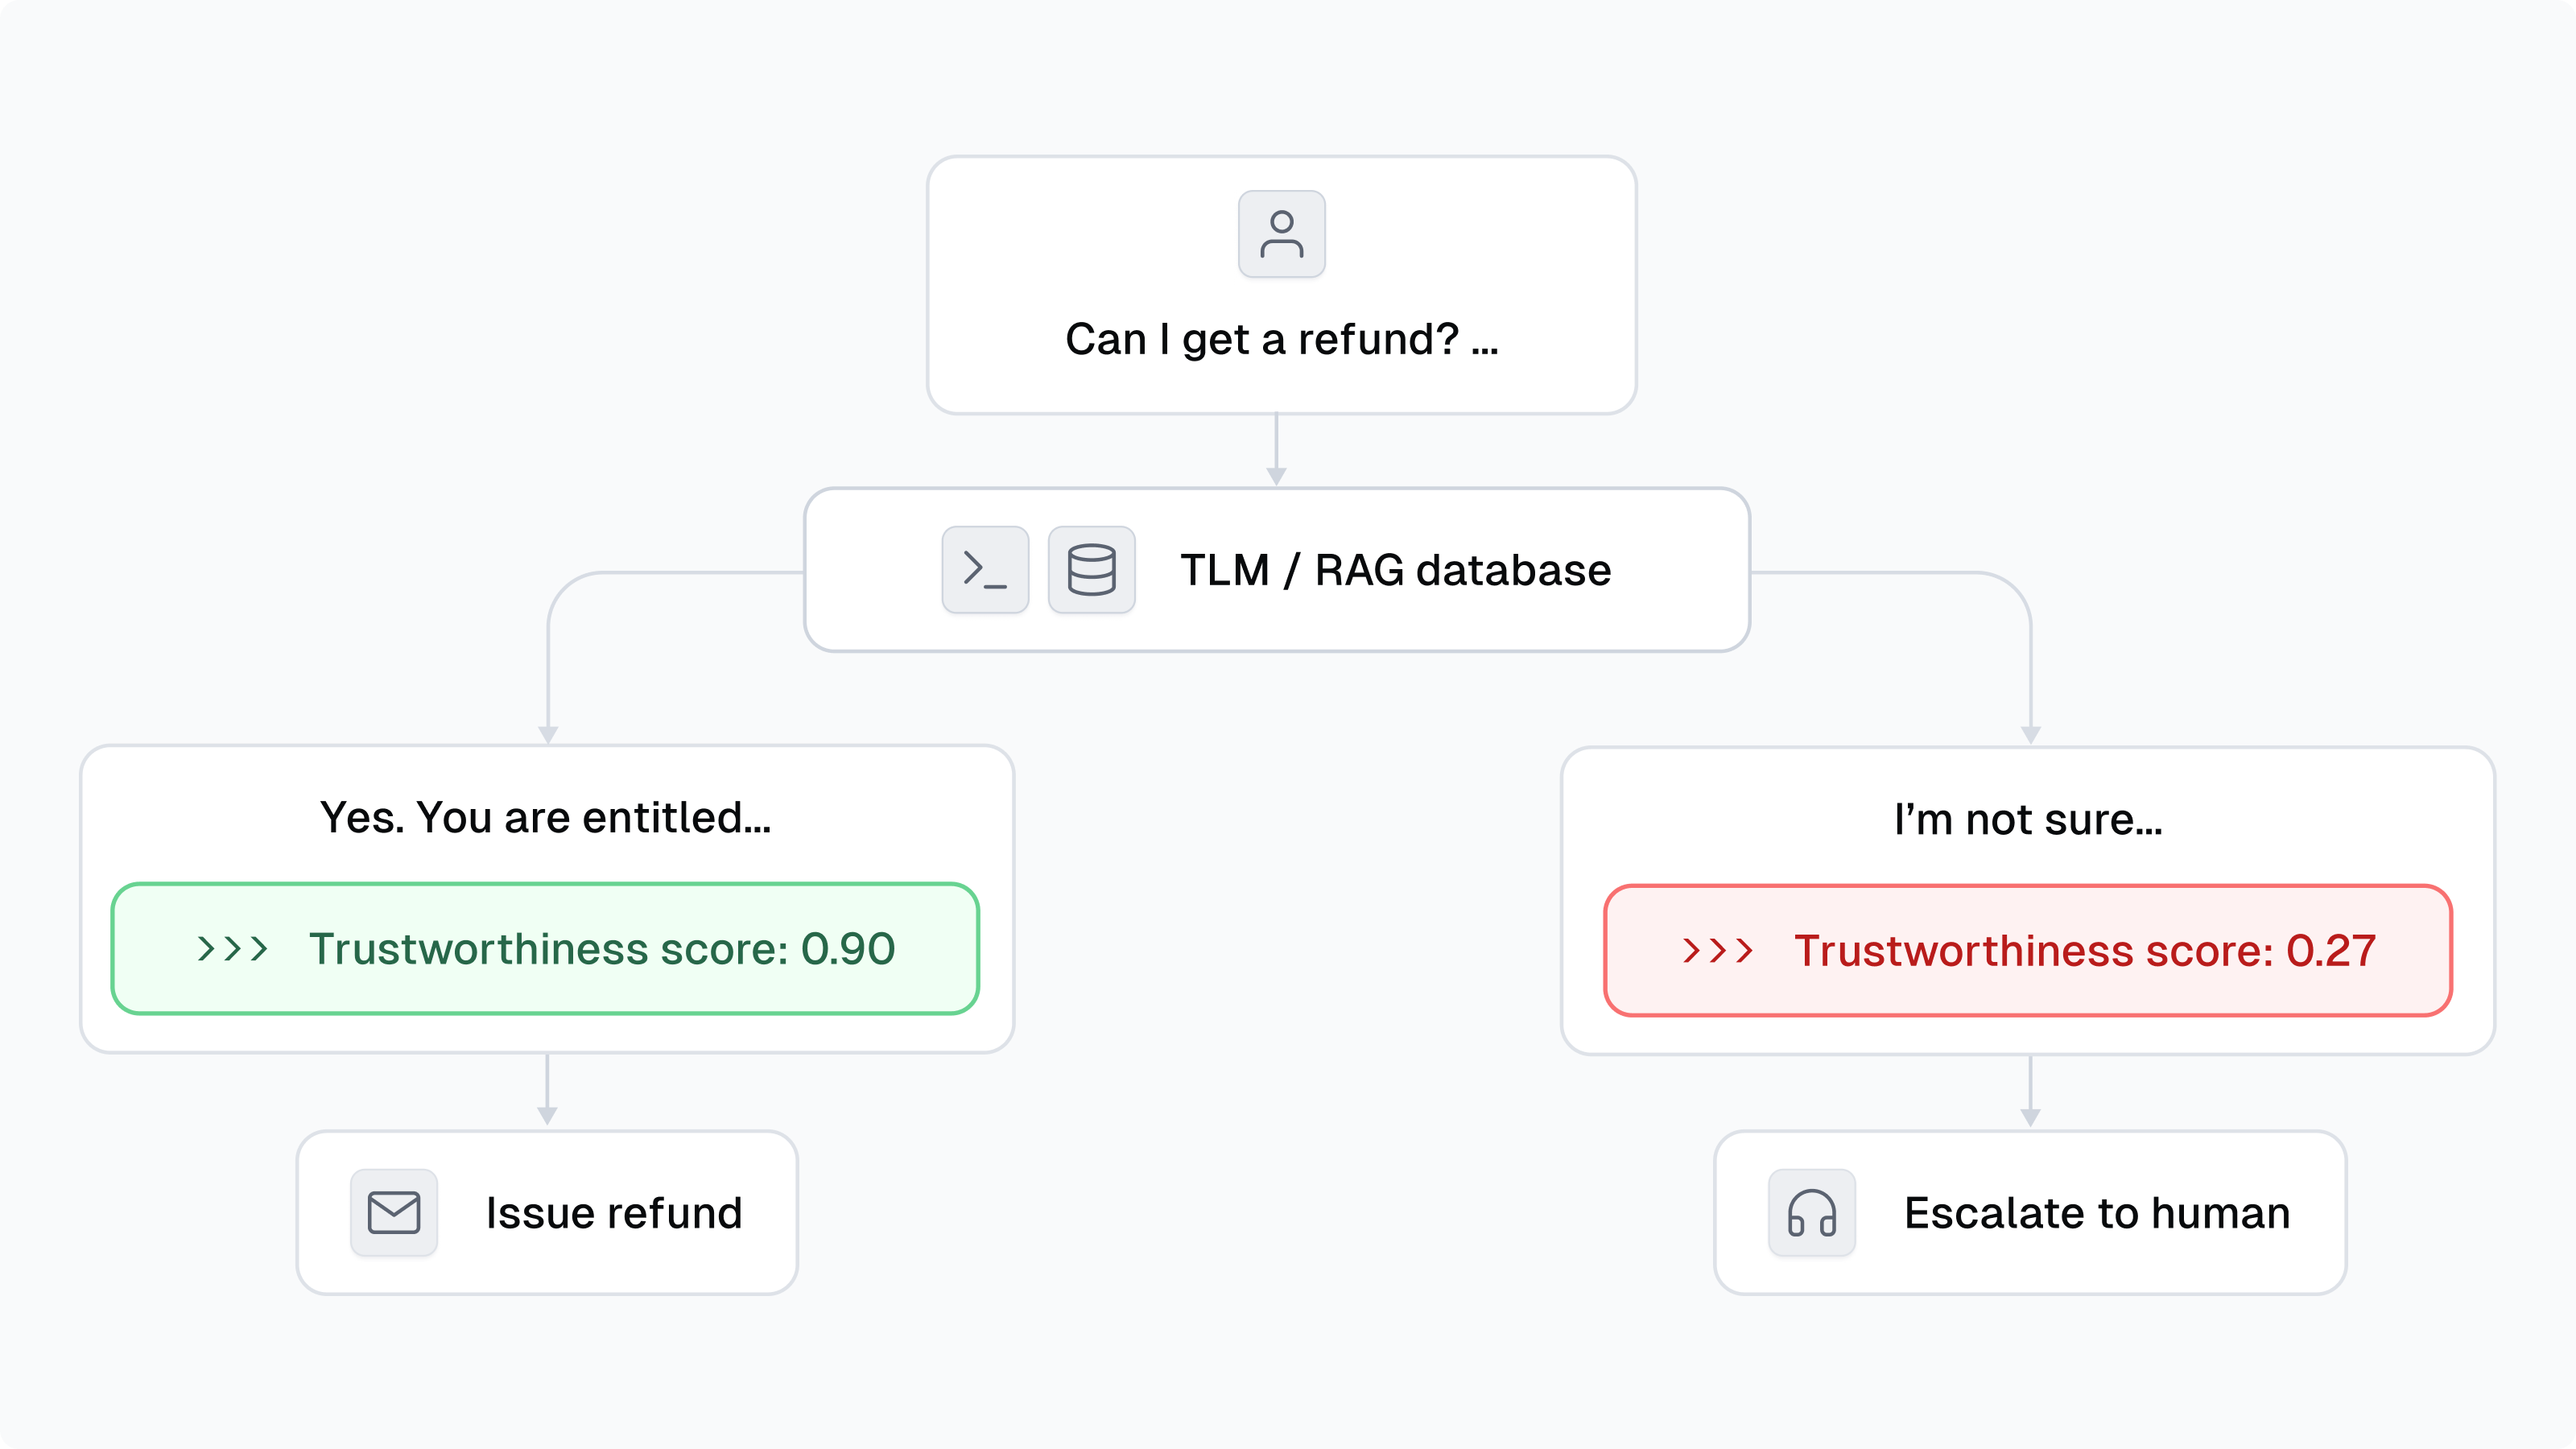 TLM enables trustworthy chatbots that don't spread misinformation